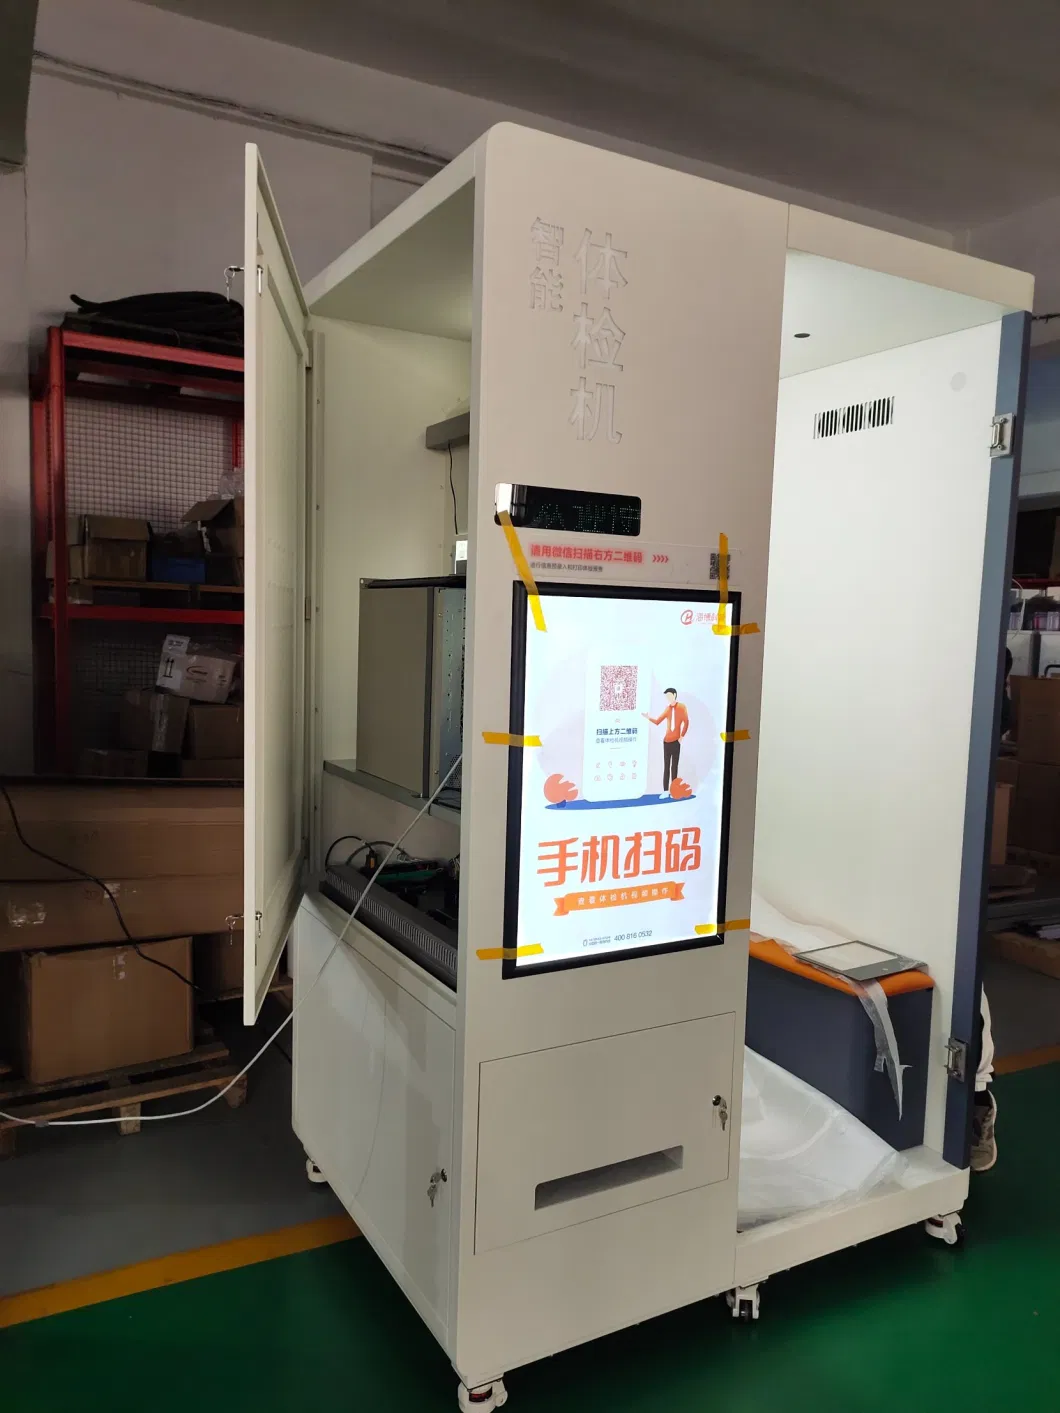 Yy-H 132kw Constant Pressure Water Supply Control Cabinet Qem Mcc Panel Boards Electrical with Soft Starter